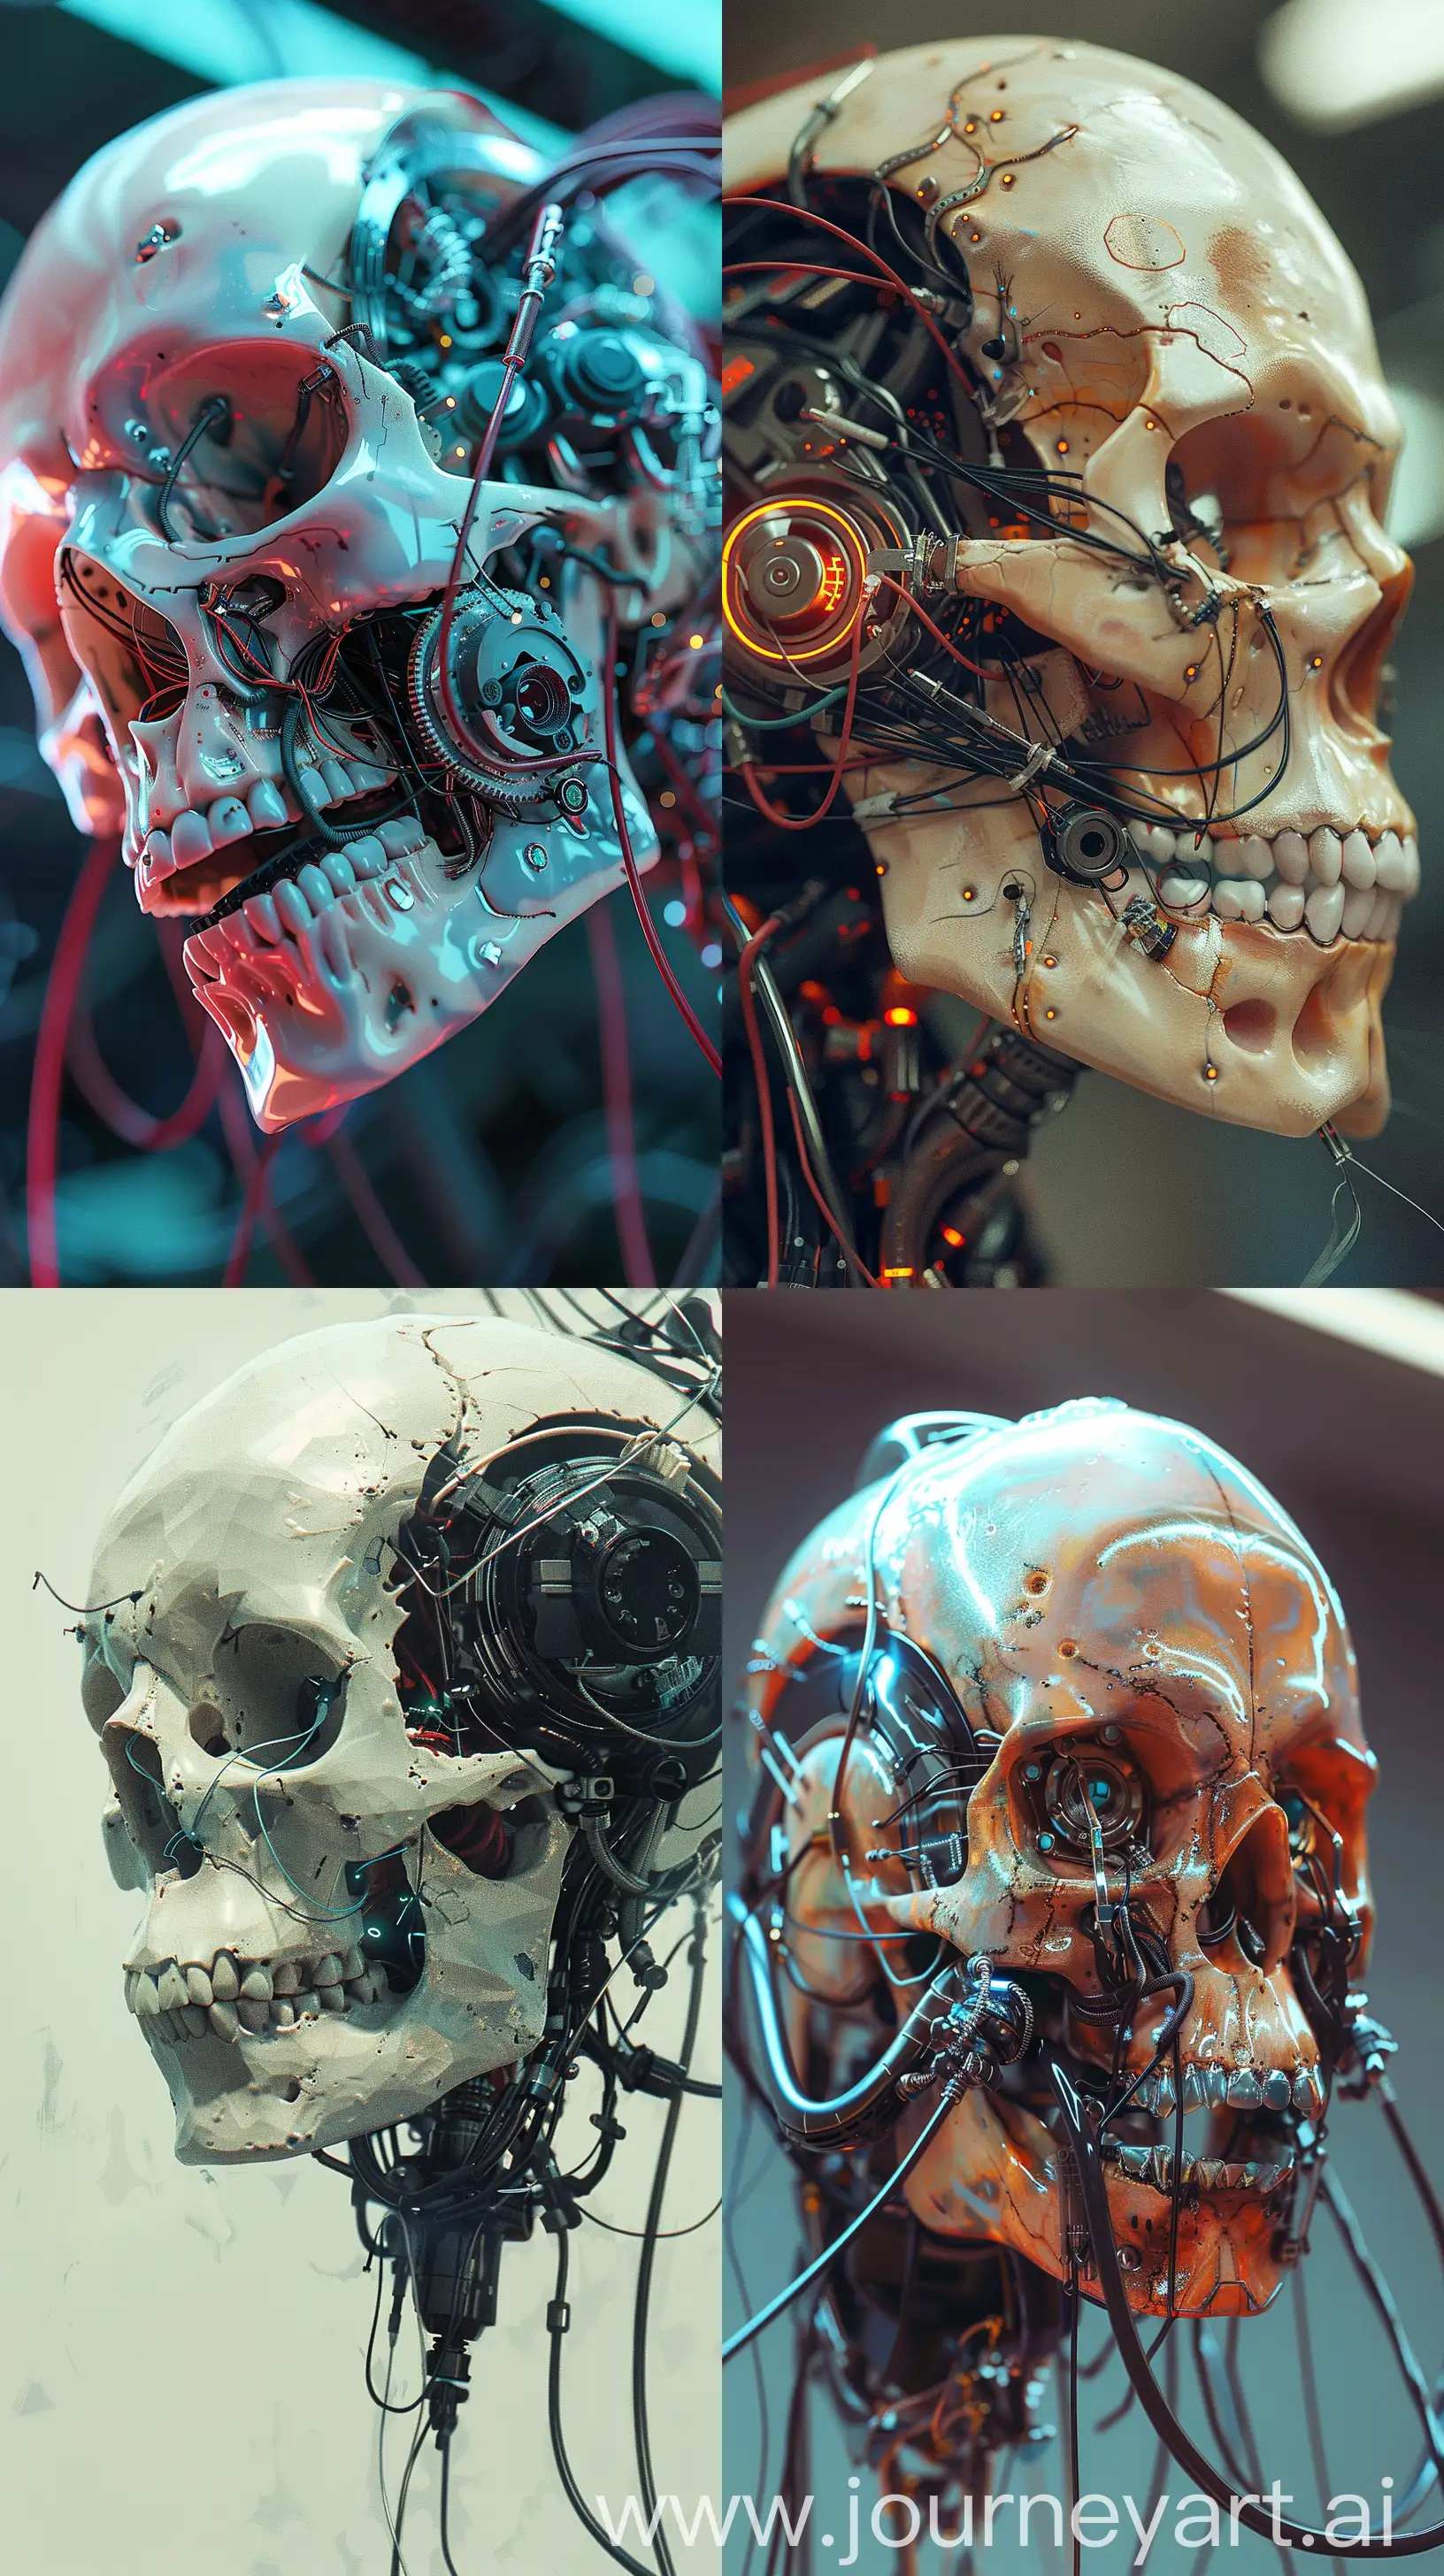 opalescence technical digital design, accurate skull cyborg head plugged into wires, tech linked with skull --ar 9:16